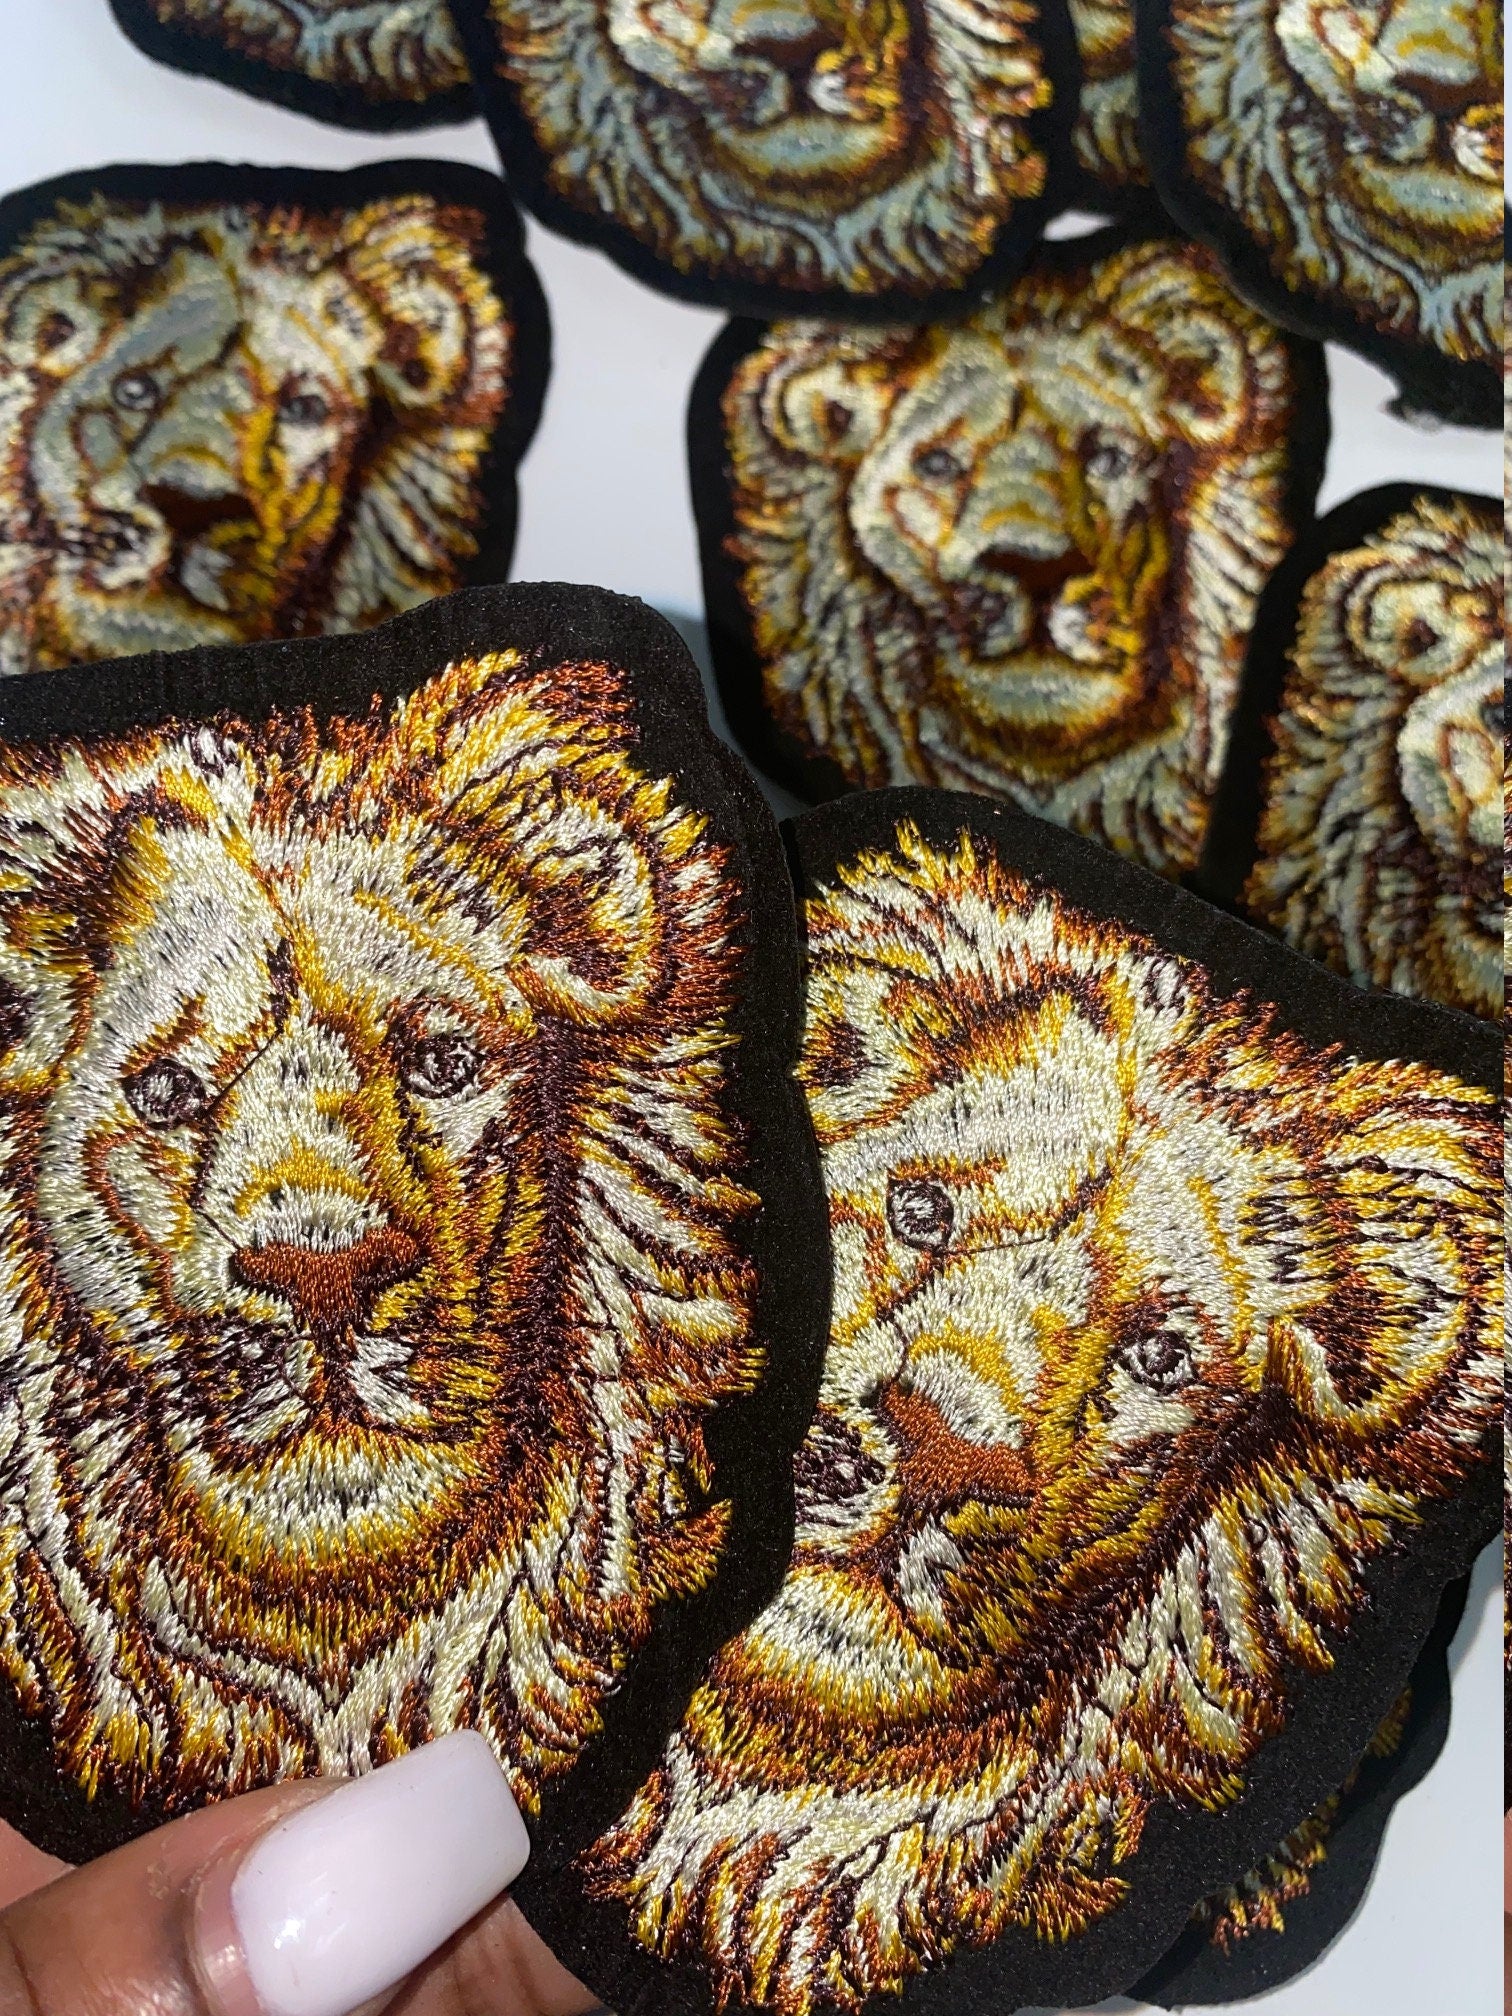 The Lion King Iron on Patch, Patches, Patches Iron on ,embroidered